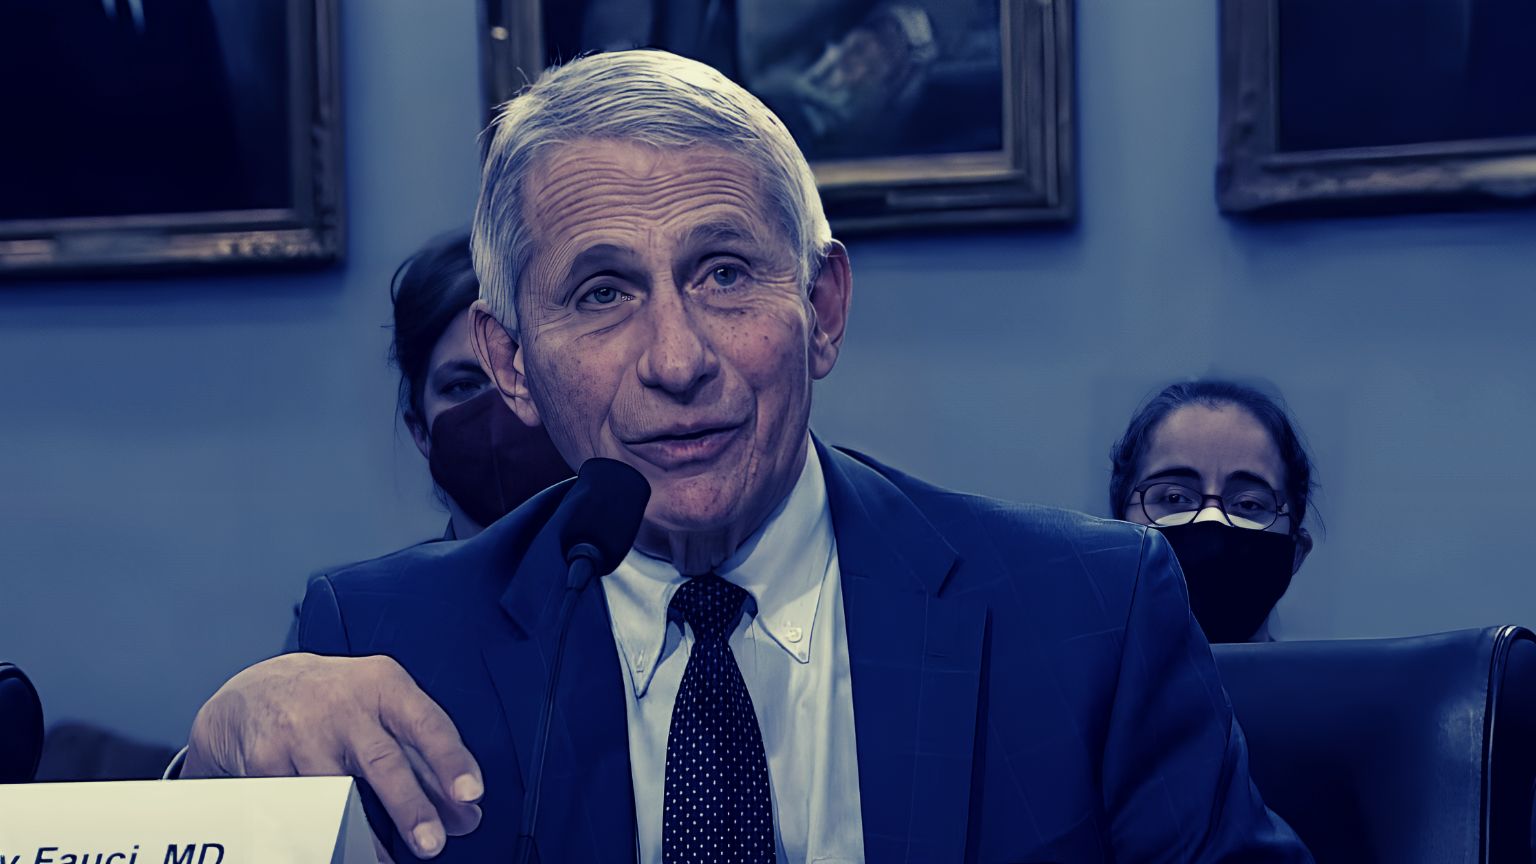 Fauci to be deposed as part of censorship collusion lawsuit